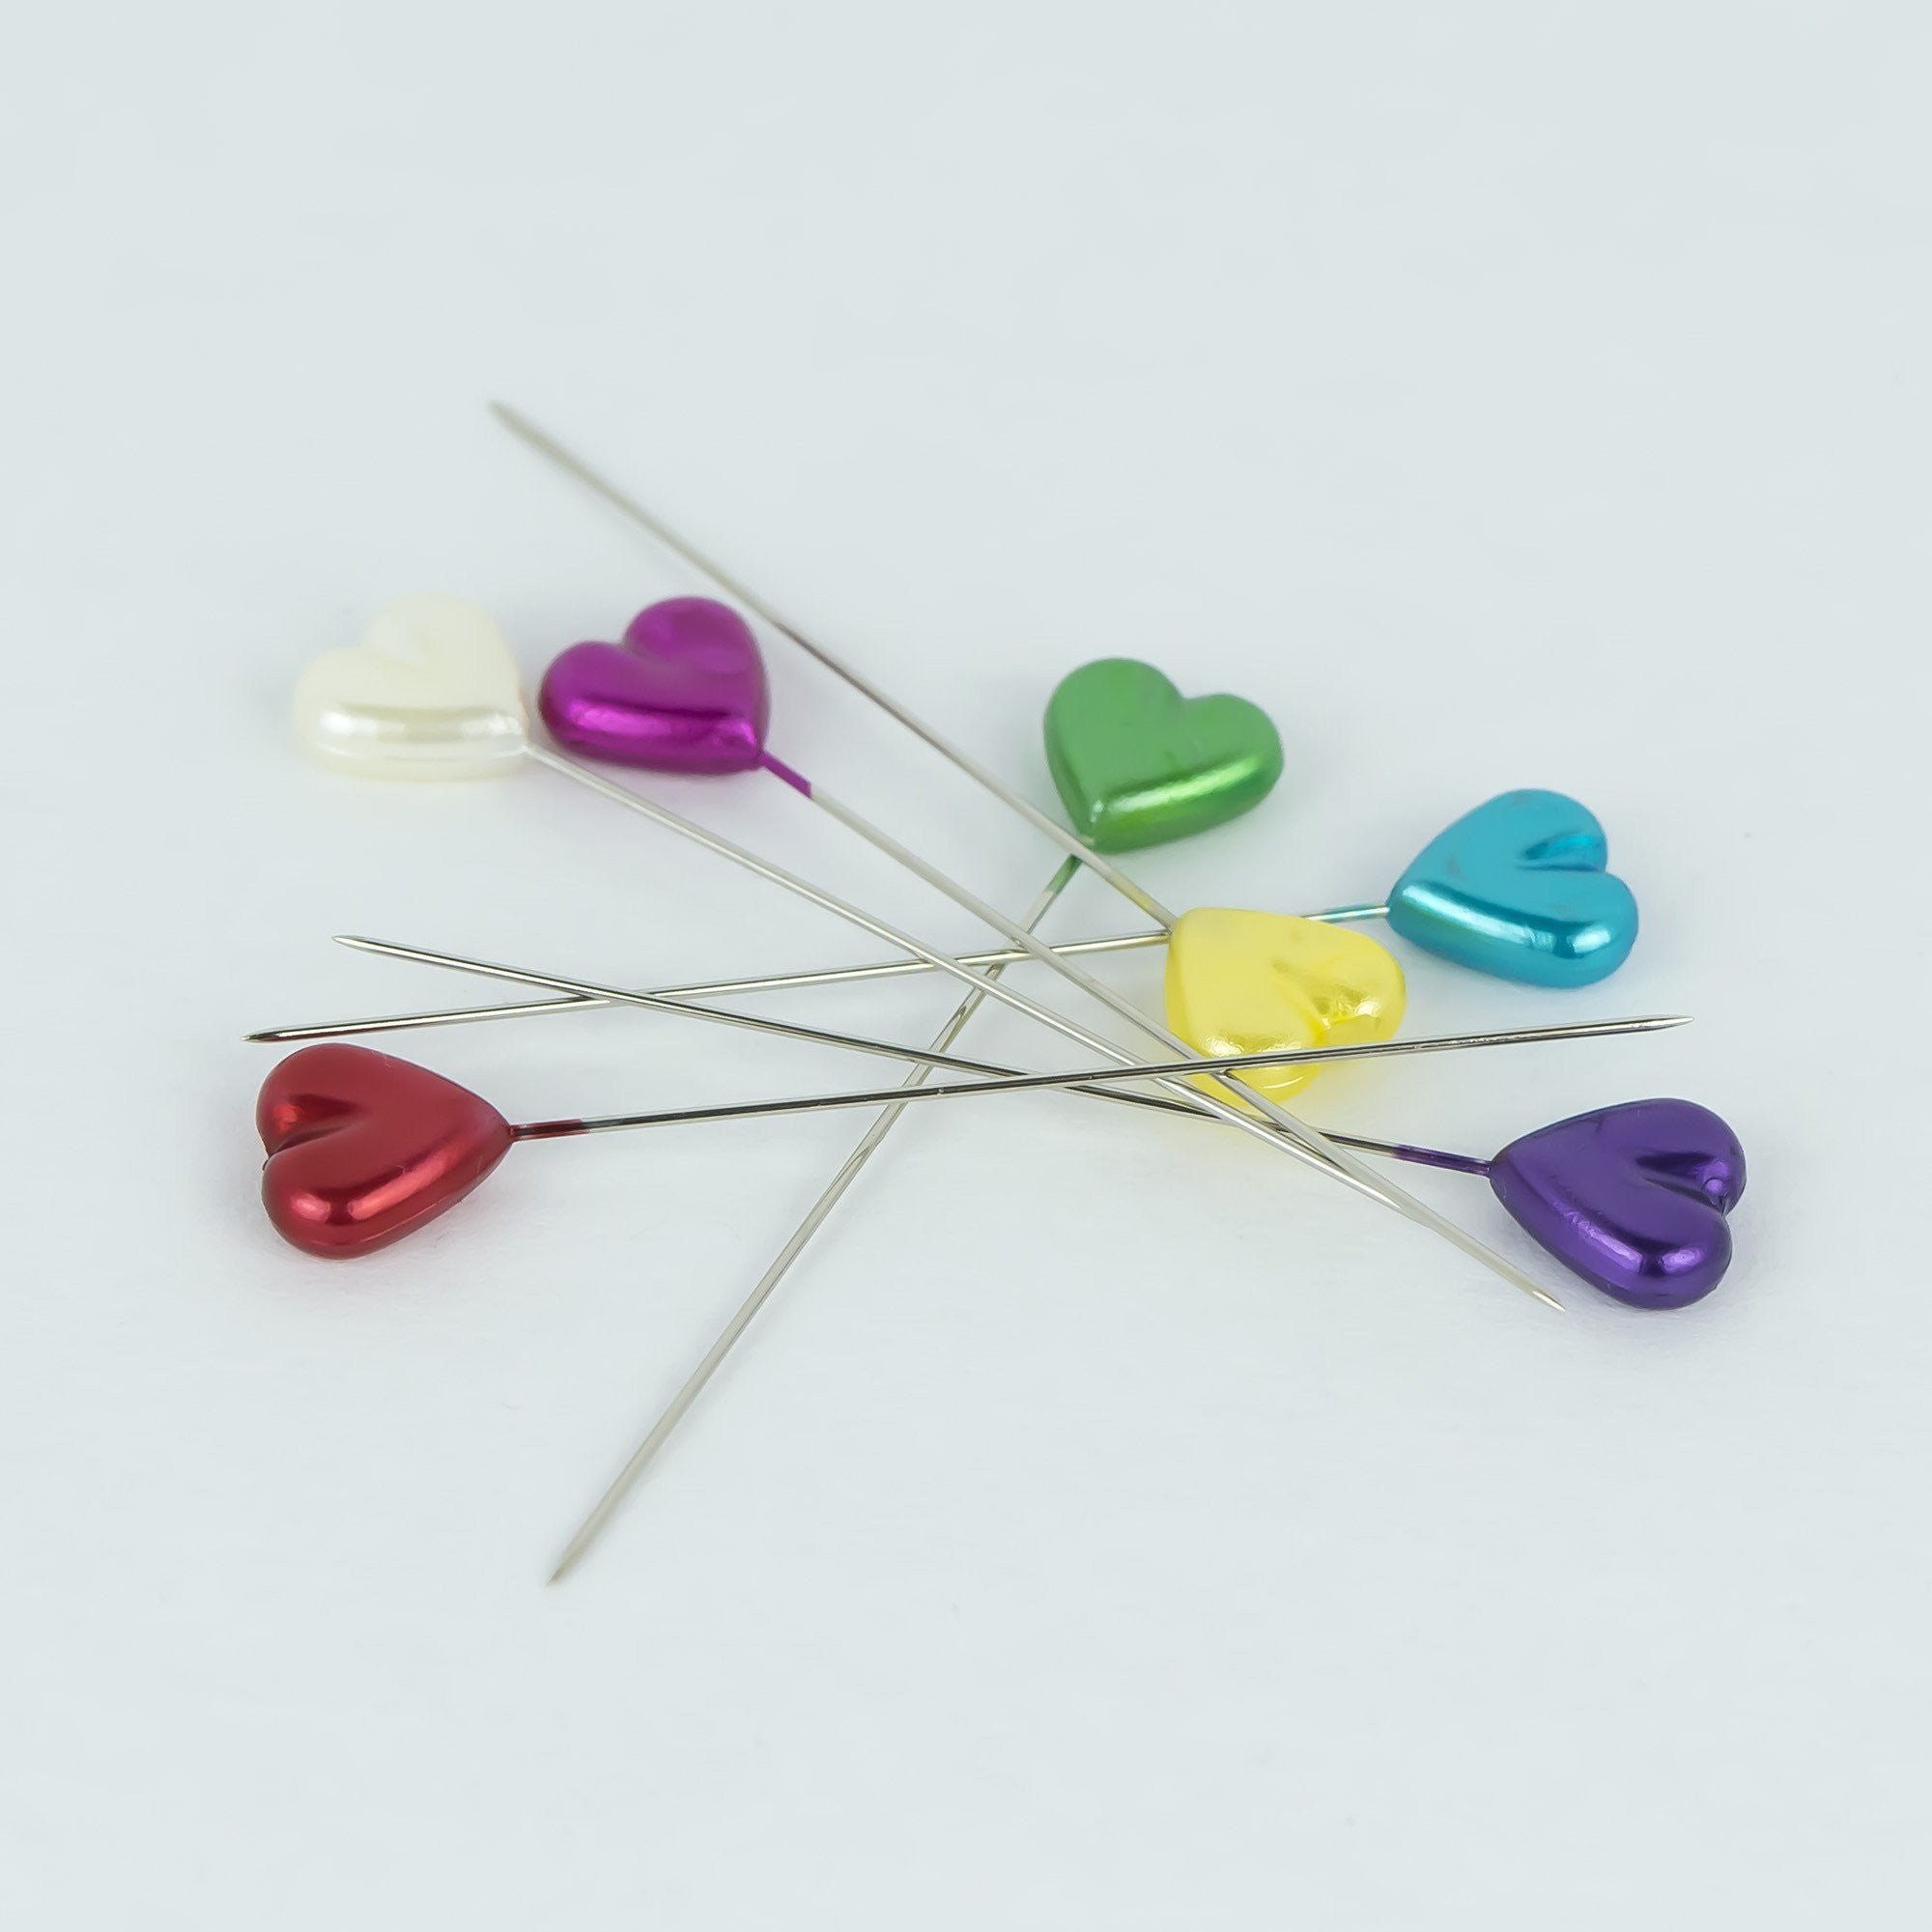 Dritz Pearlized Heart Pins  Quilting and Sewing Straight Pins – ListaLu